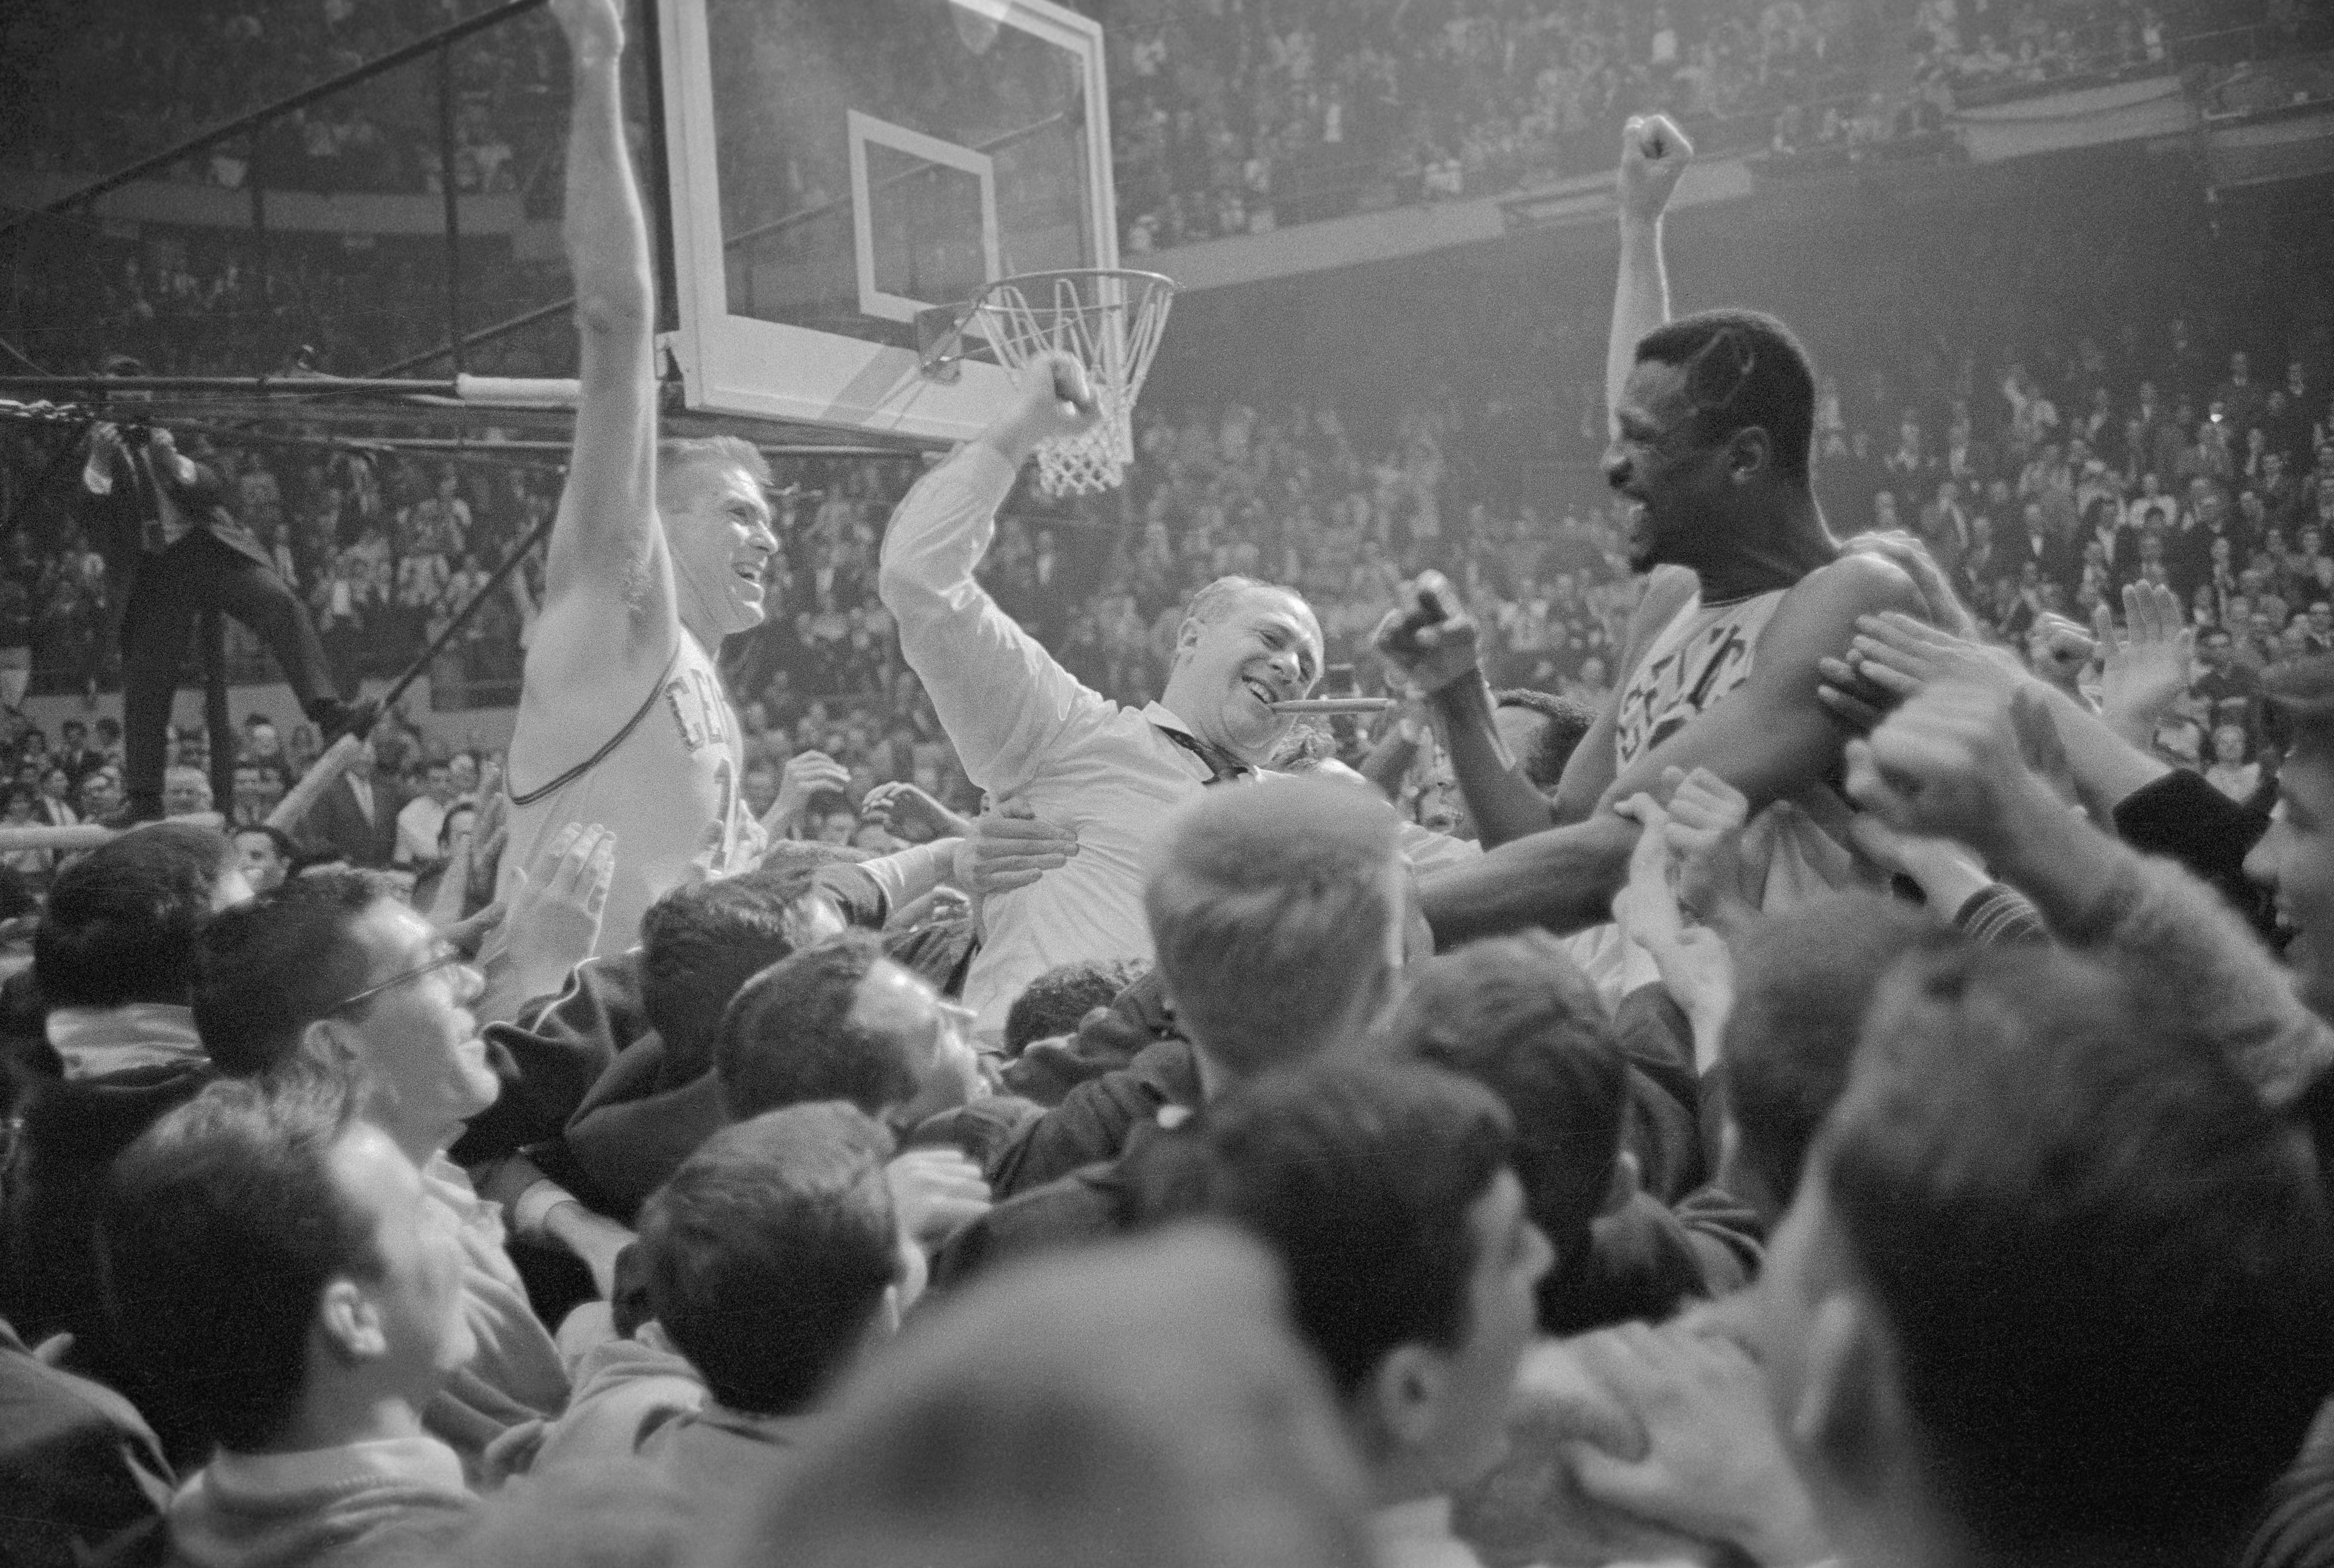 Black and white picture of Bill Russell, Red Auerbach and Tommy Heinsohn being held up by a crowd and celebrating with their arms up